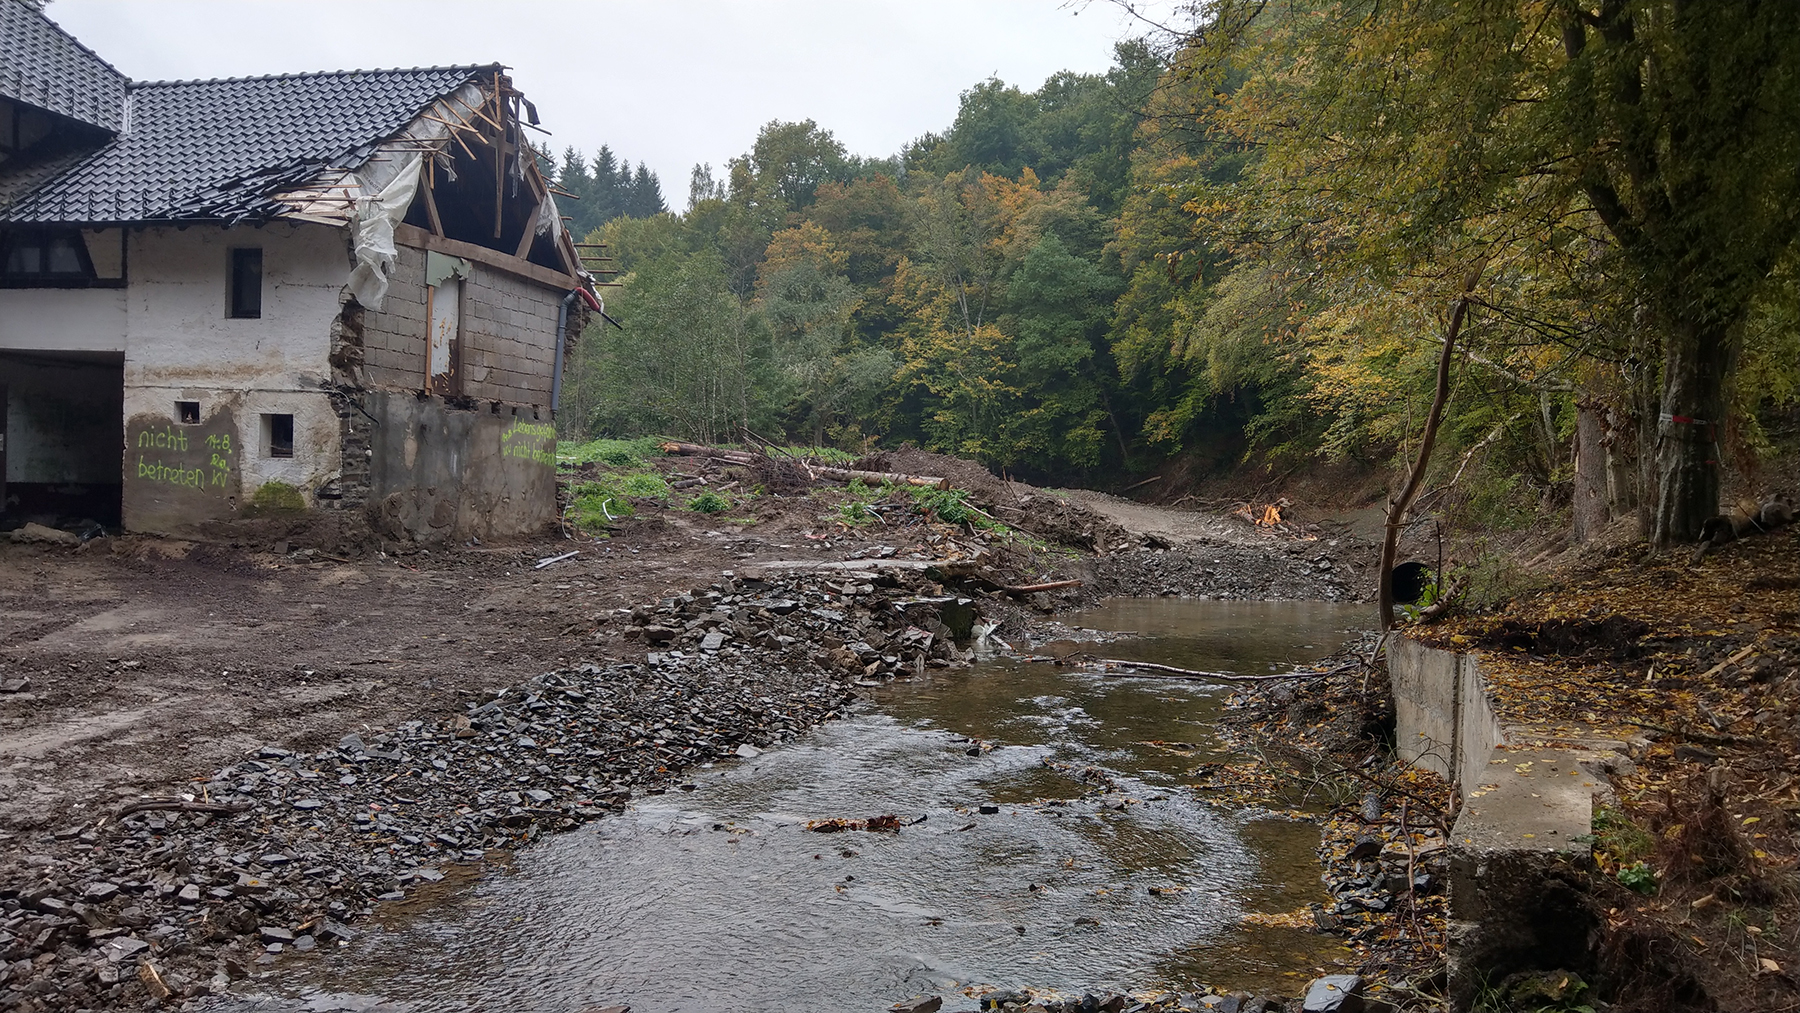 Floodwaters from the 2021 Ahr Valley flood damaged many structures, including this riverside mill in Germany. (Photograph courtesy of University of Göttingen/Michael Dietze)